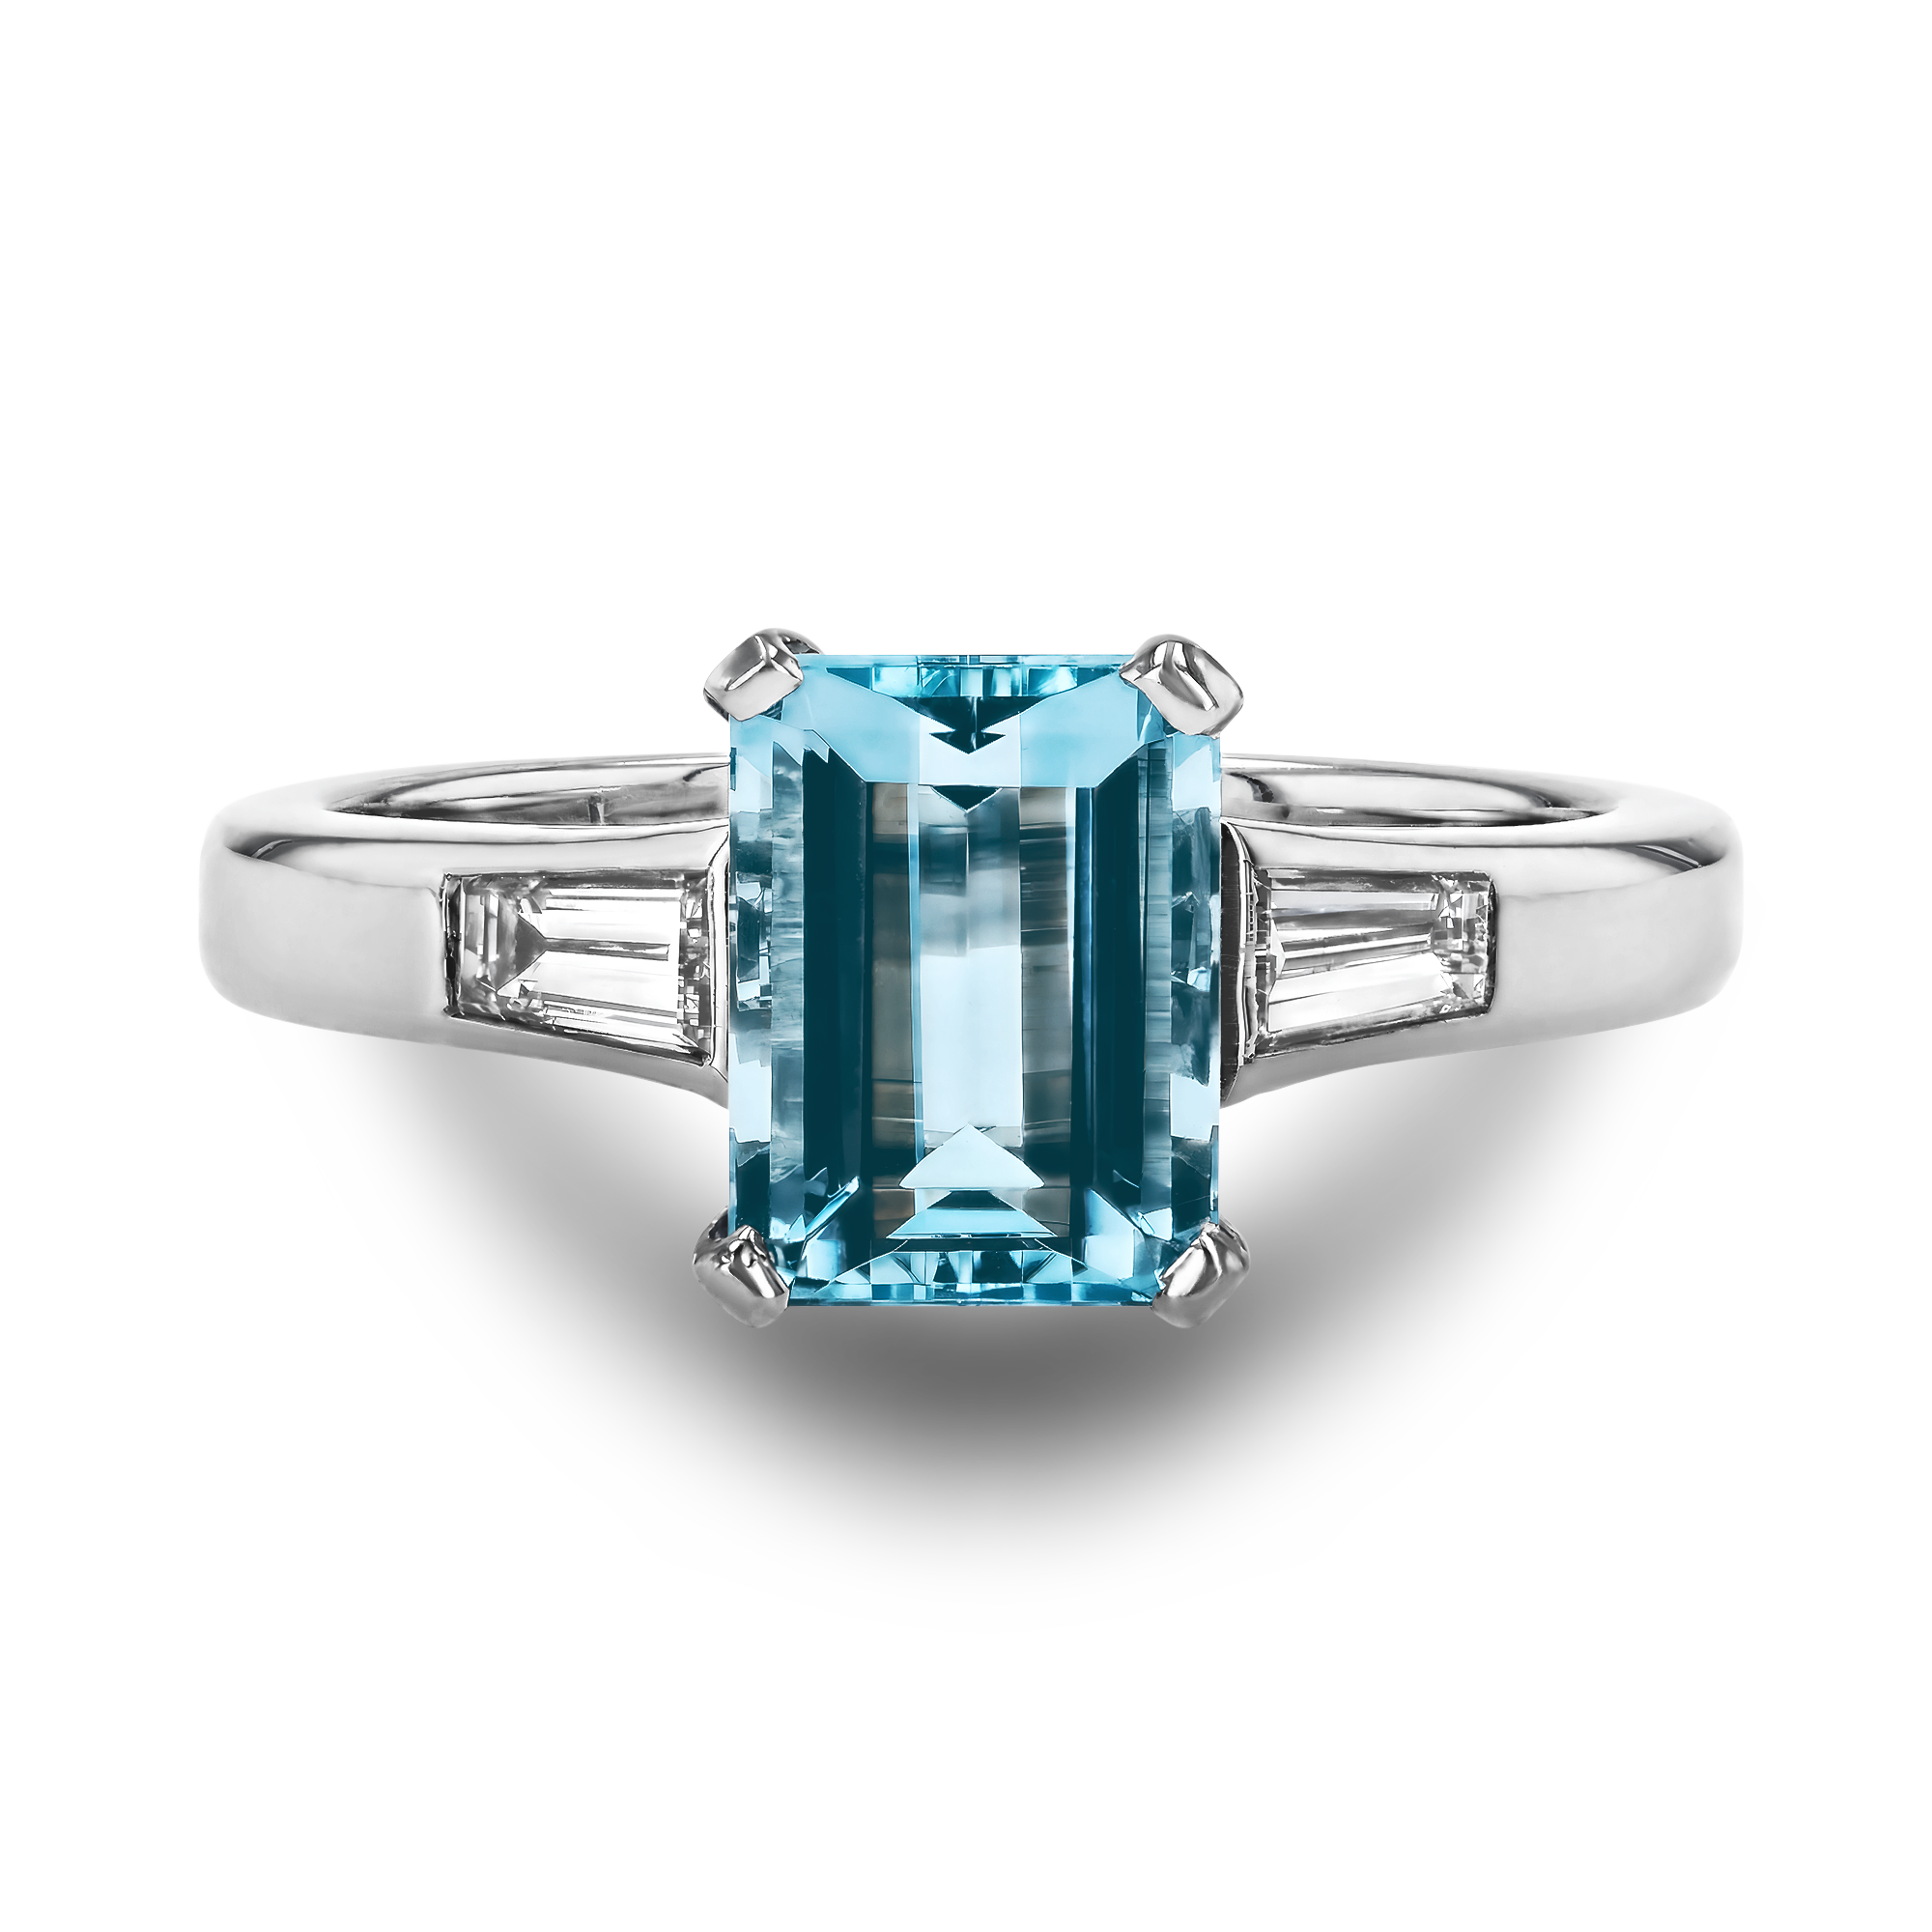 Because who doesn't need a 36 carat Cartier aquamarine ring? 🤤 | By  Wilson's Estate JewelryFacebook